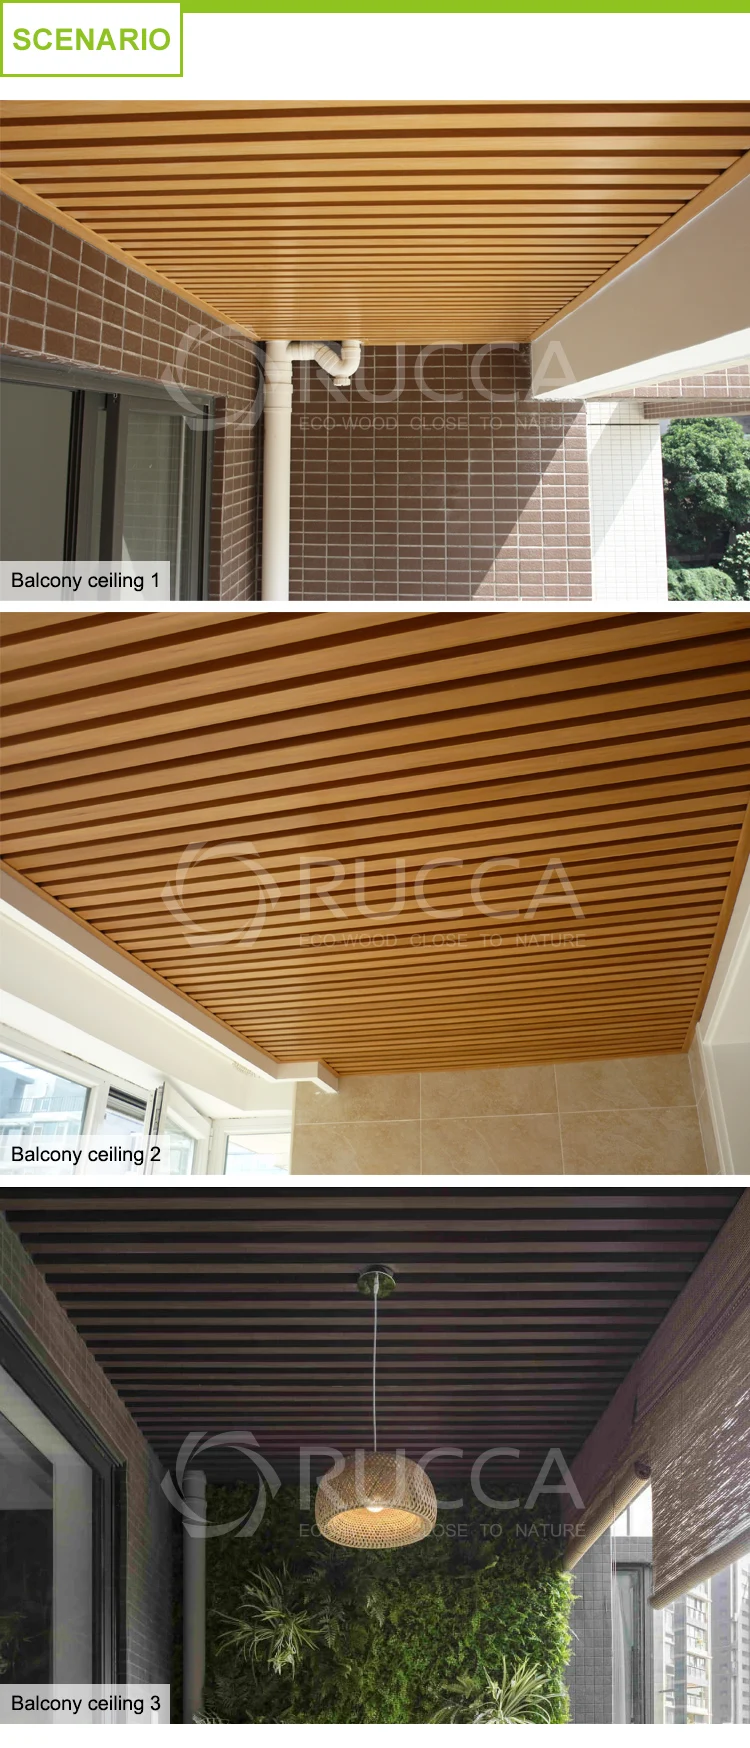 Rucca Wood And Pvc Composite,Fauxwood Indoor Suspended ...